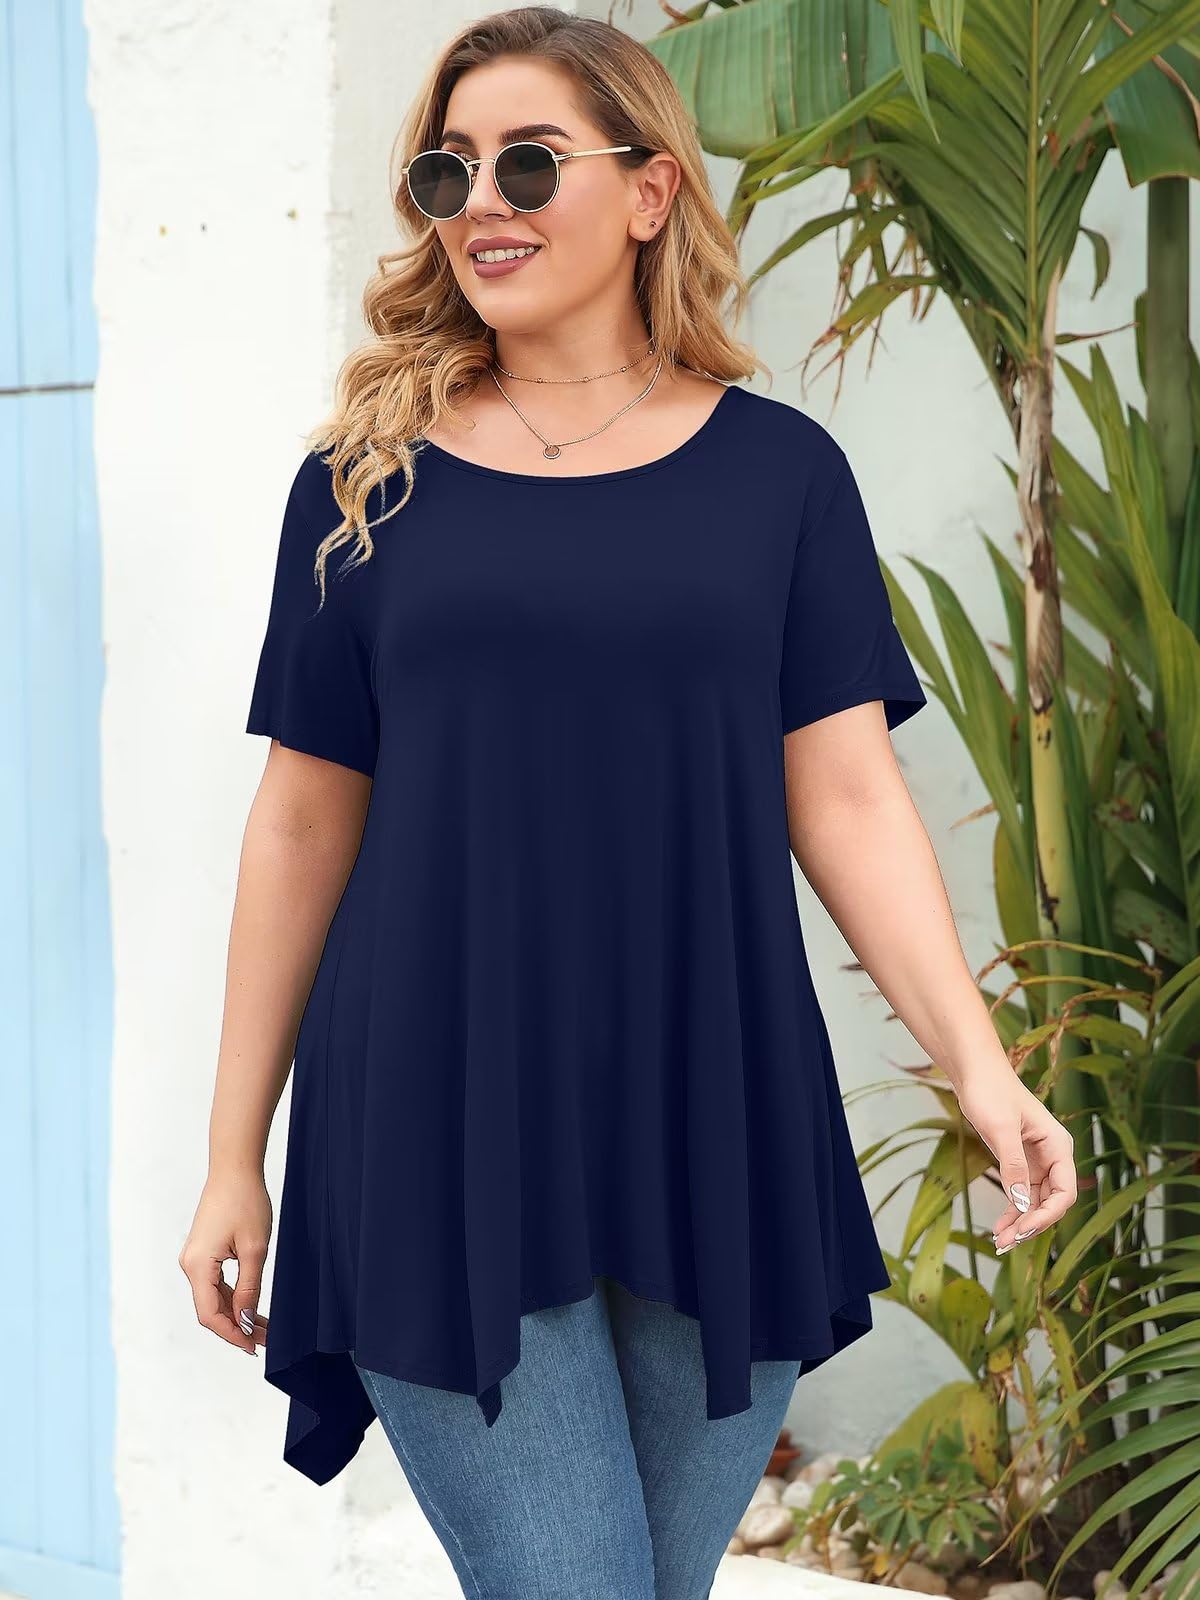 LARACE Short Sleeve Shirts for Womens Plus Size Tops Casual Summer Clothes Asymmetrical Tunic Blouses